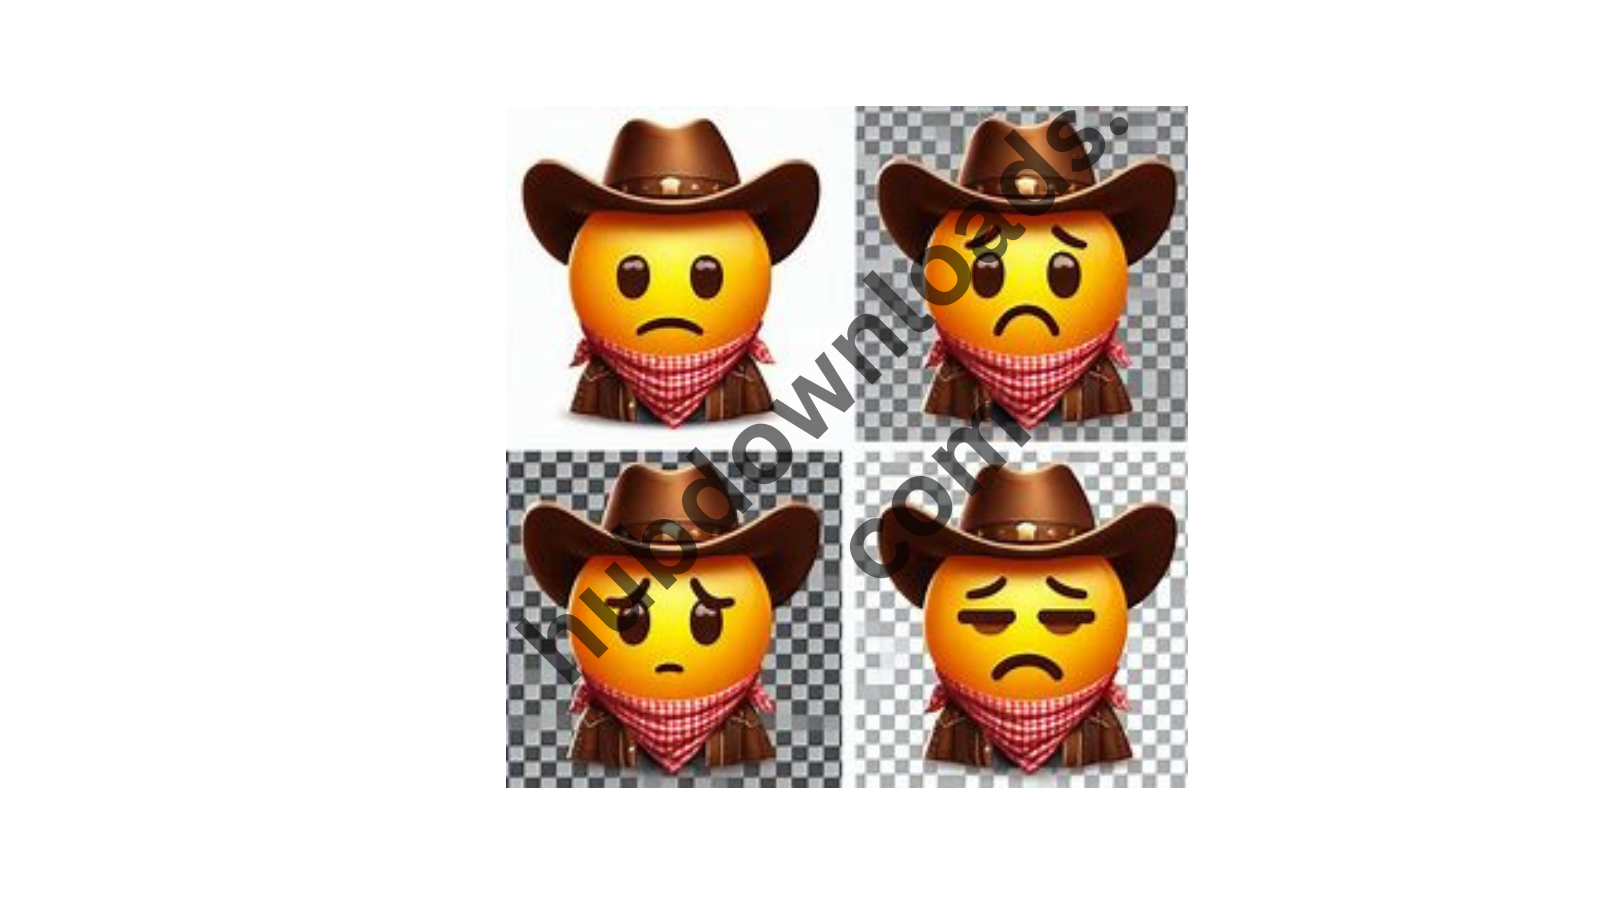 A collage of four sad cowboy emojis with varying expressions of sadness and disappointment. Each emoji wears a brown cowboy hat and red bandana.